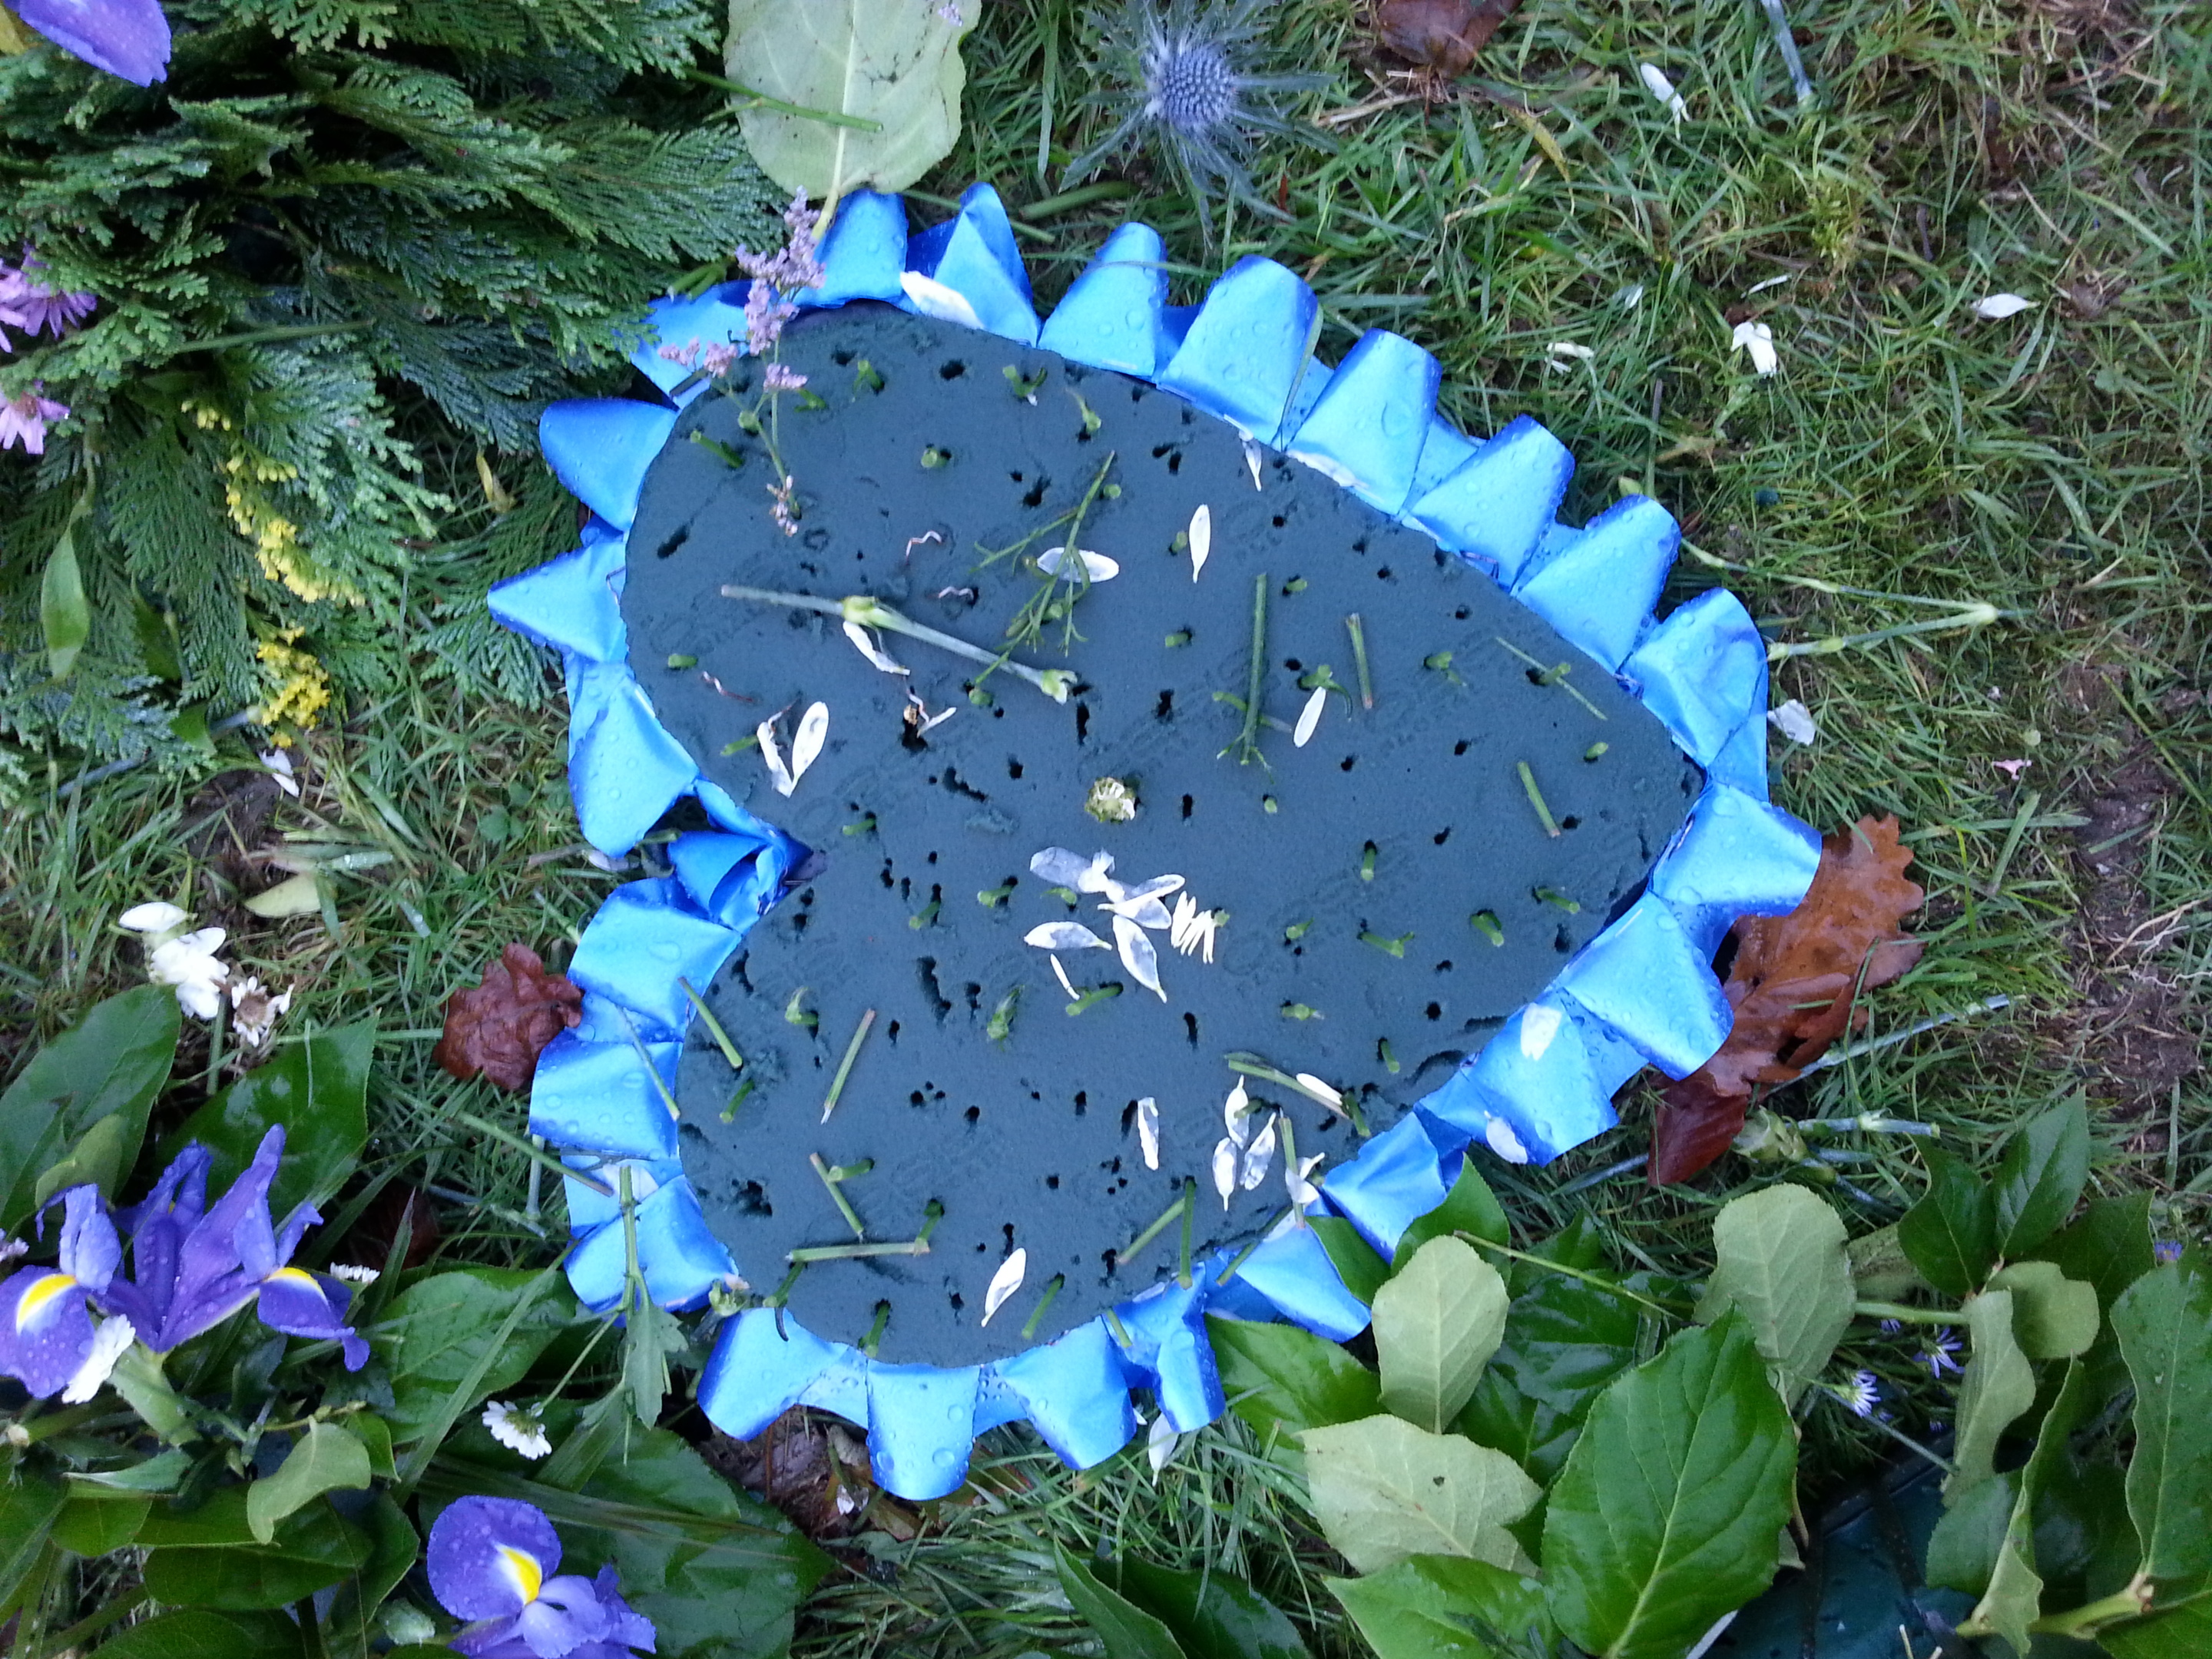 One of the floral tributes that was eaten by the deer